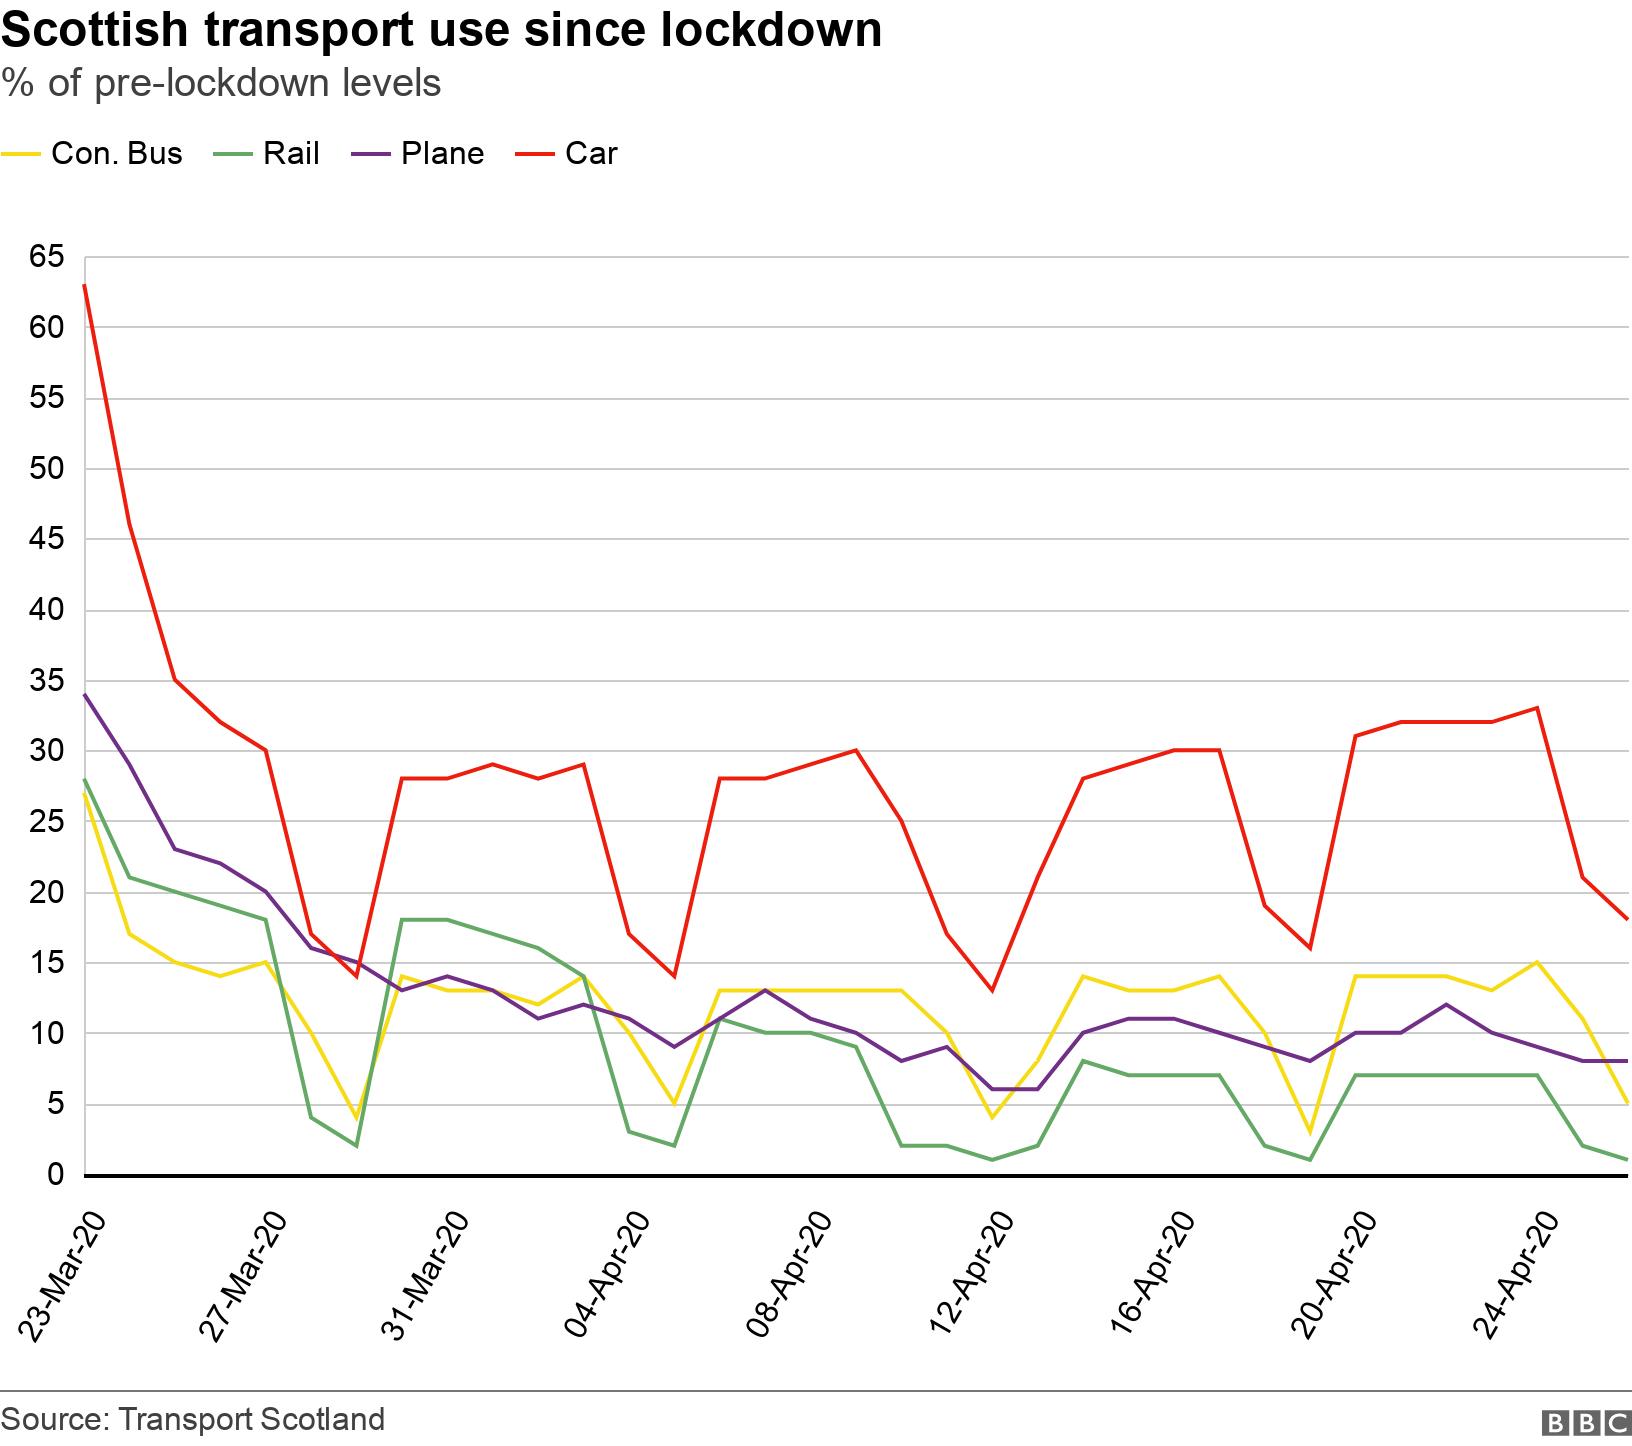 Scottish transport use since lockdown. % of pre-lockdown levels. Transport use has fallen off hugely since lockdown began, but some measures - like car use - have begun to tick up again, albeit still at a fraction of the original rate .